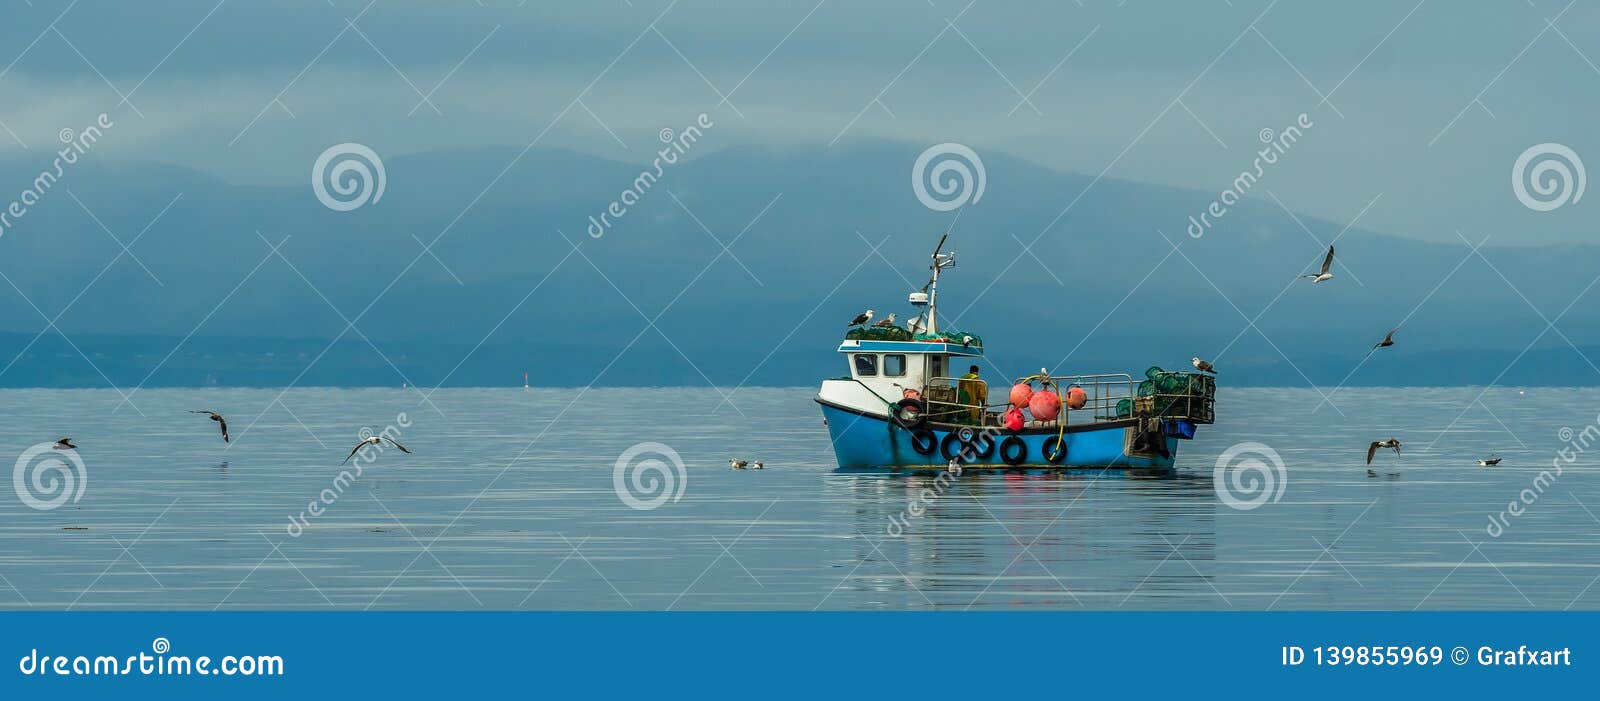 Small Fishing Boat With Lobster Pods And Seagulls On Calm Atlantic In Front  Of The Hebride Islands by Andreas Berthold